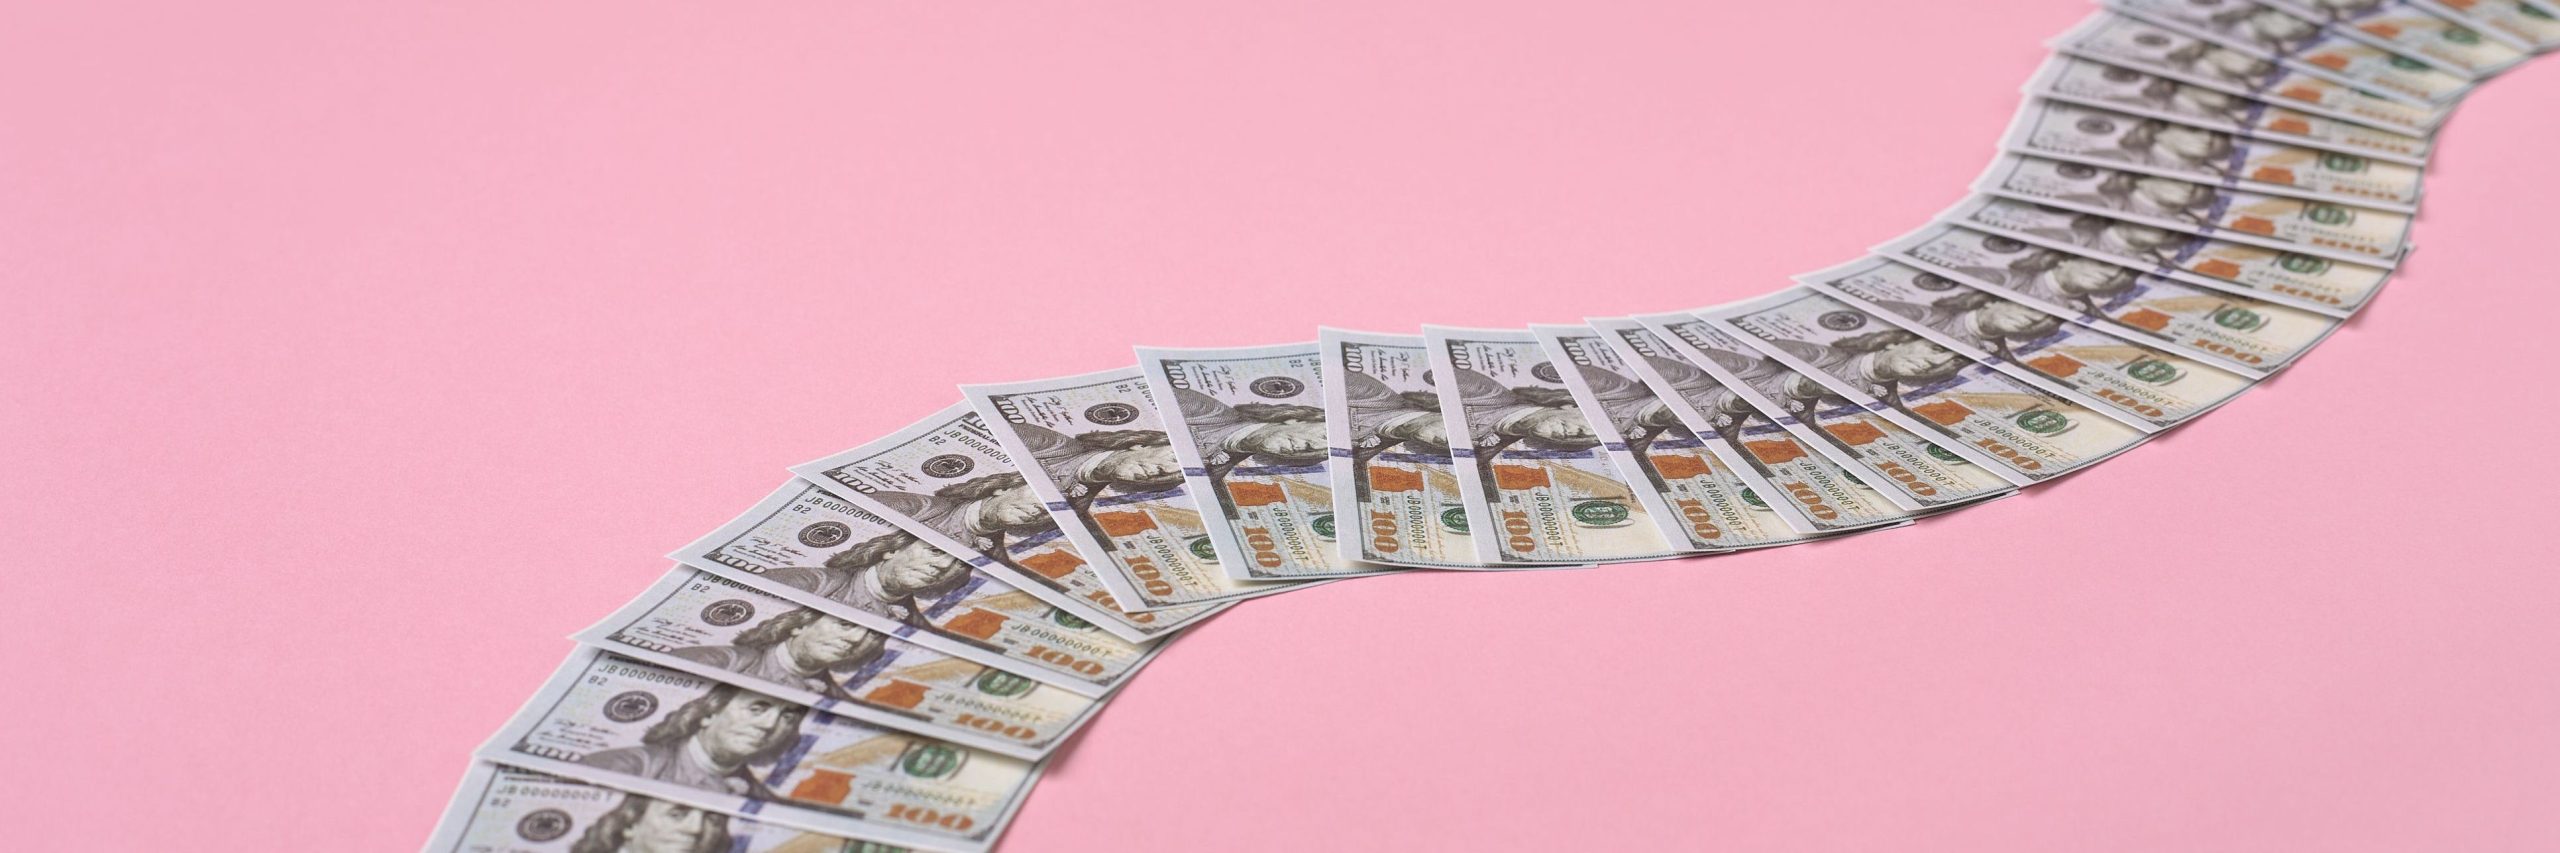 Money path made of 100 dollar bills on pink background. Concept of financial road. , collections